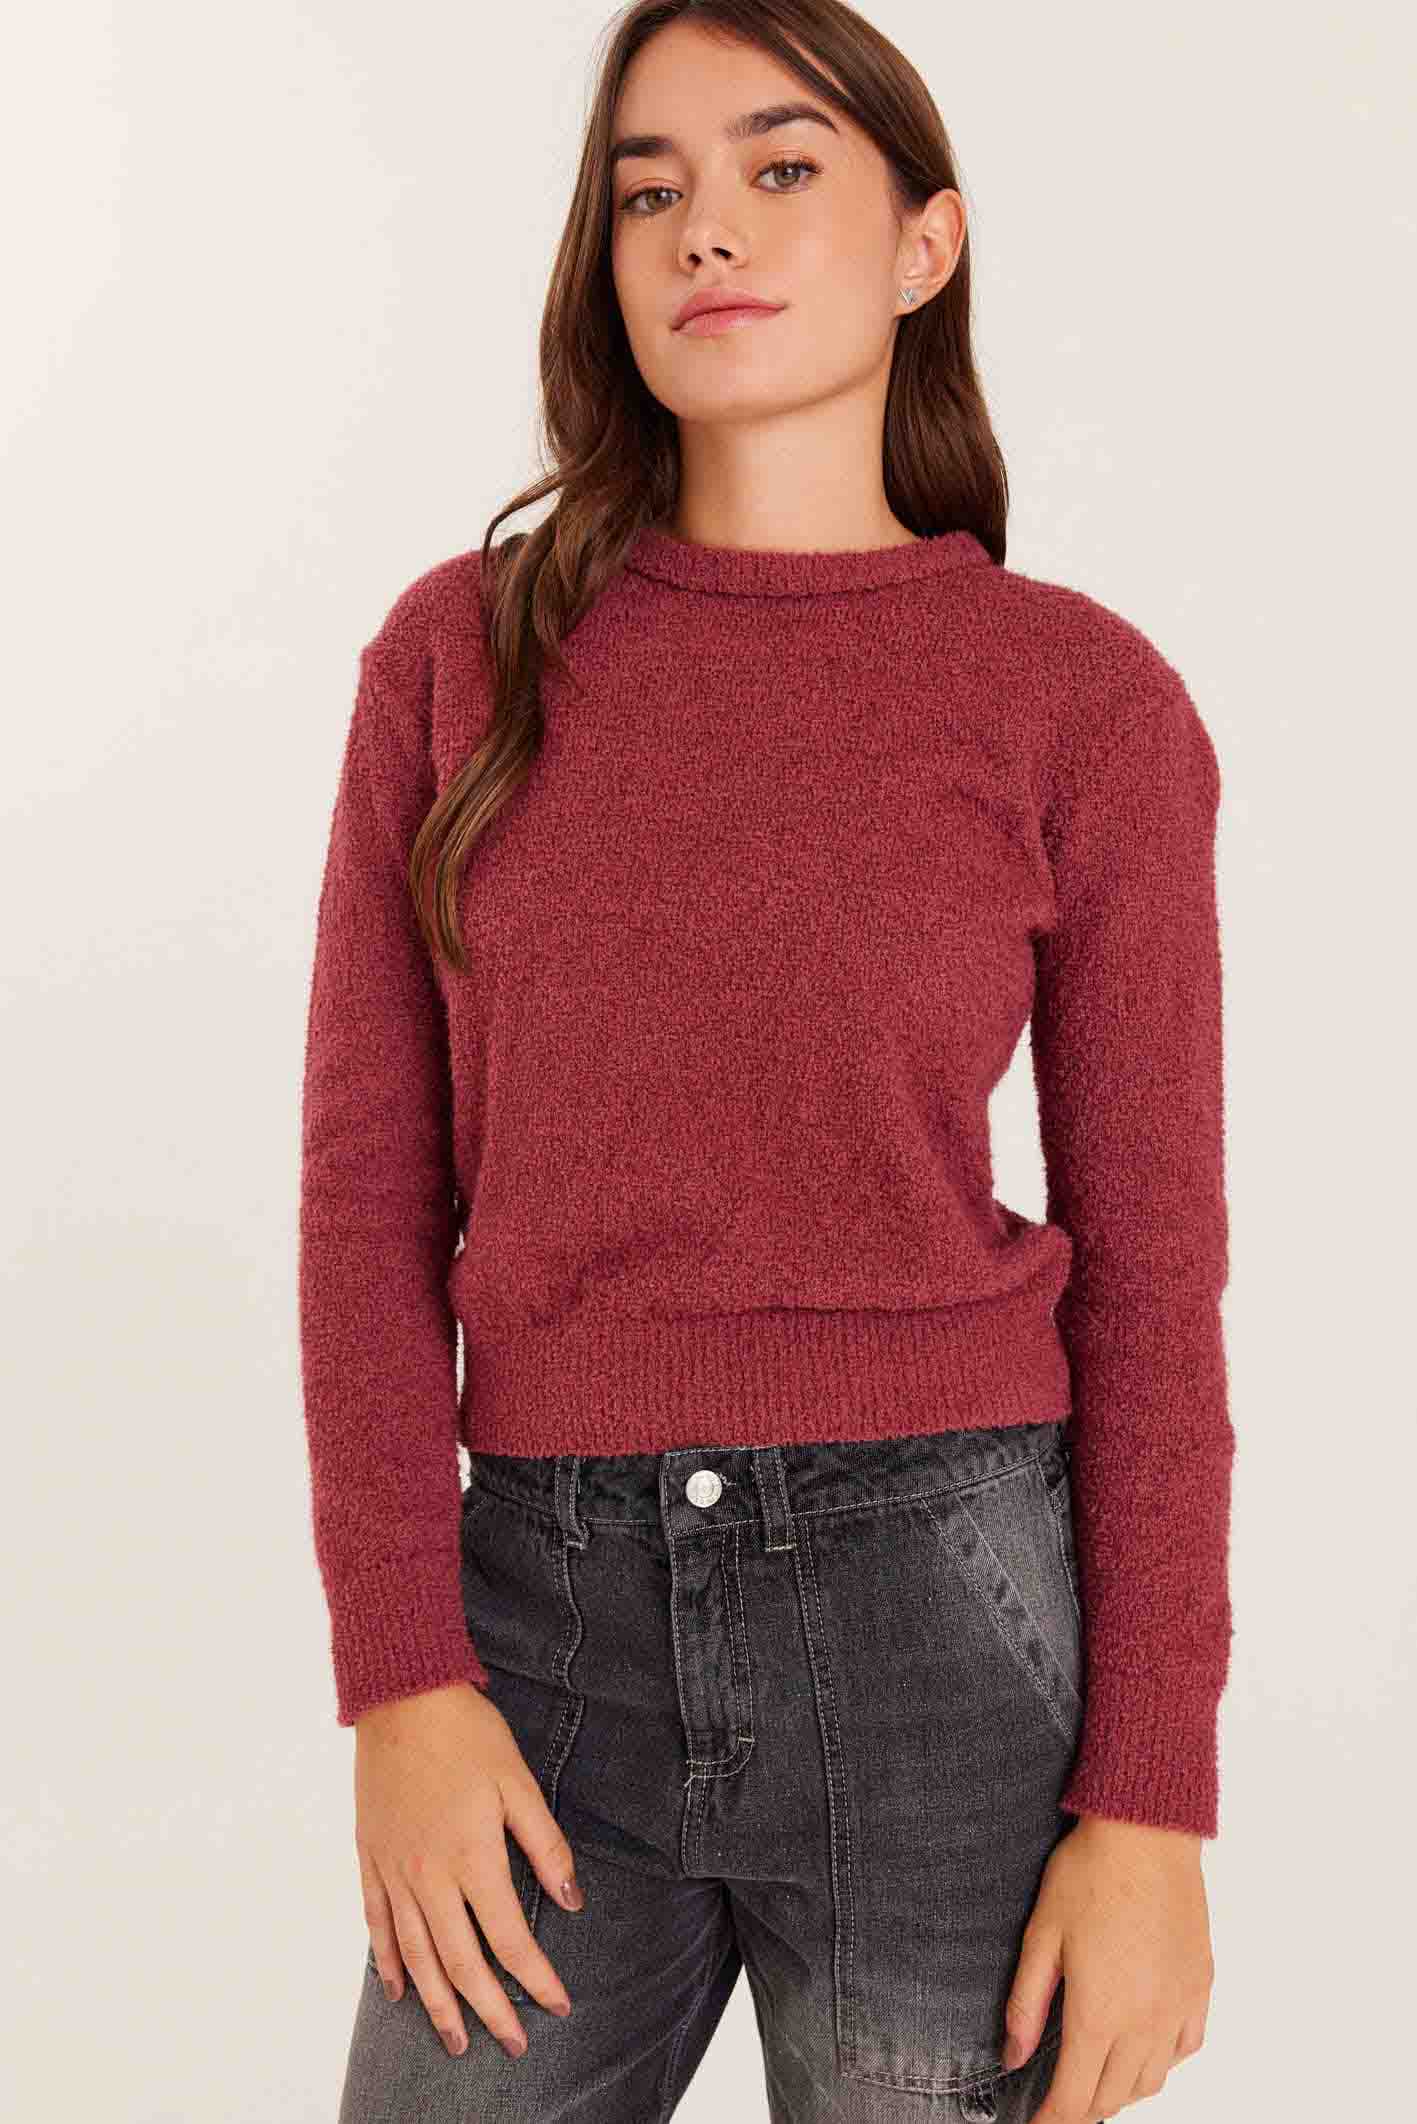 comoquieres_sweater-softly-xs_32-16-2024__picture-45237